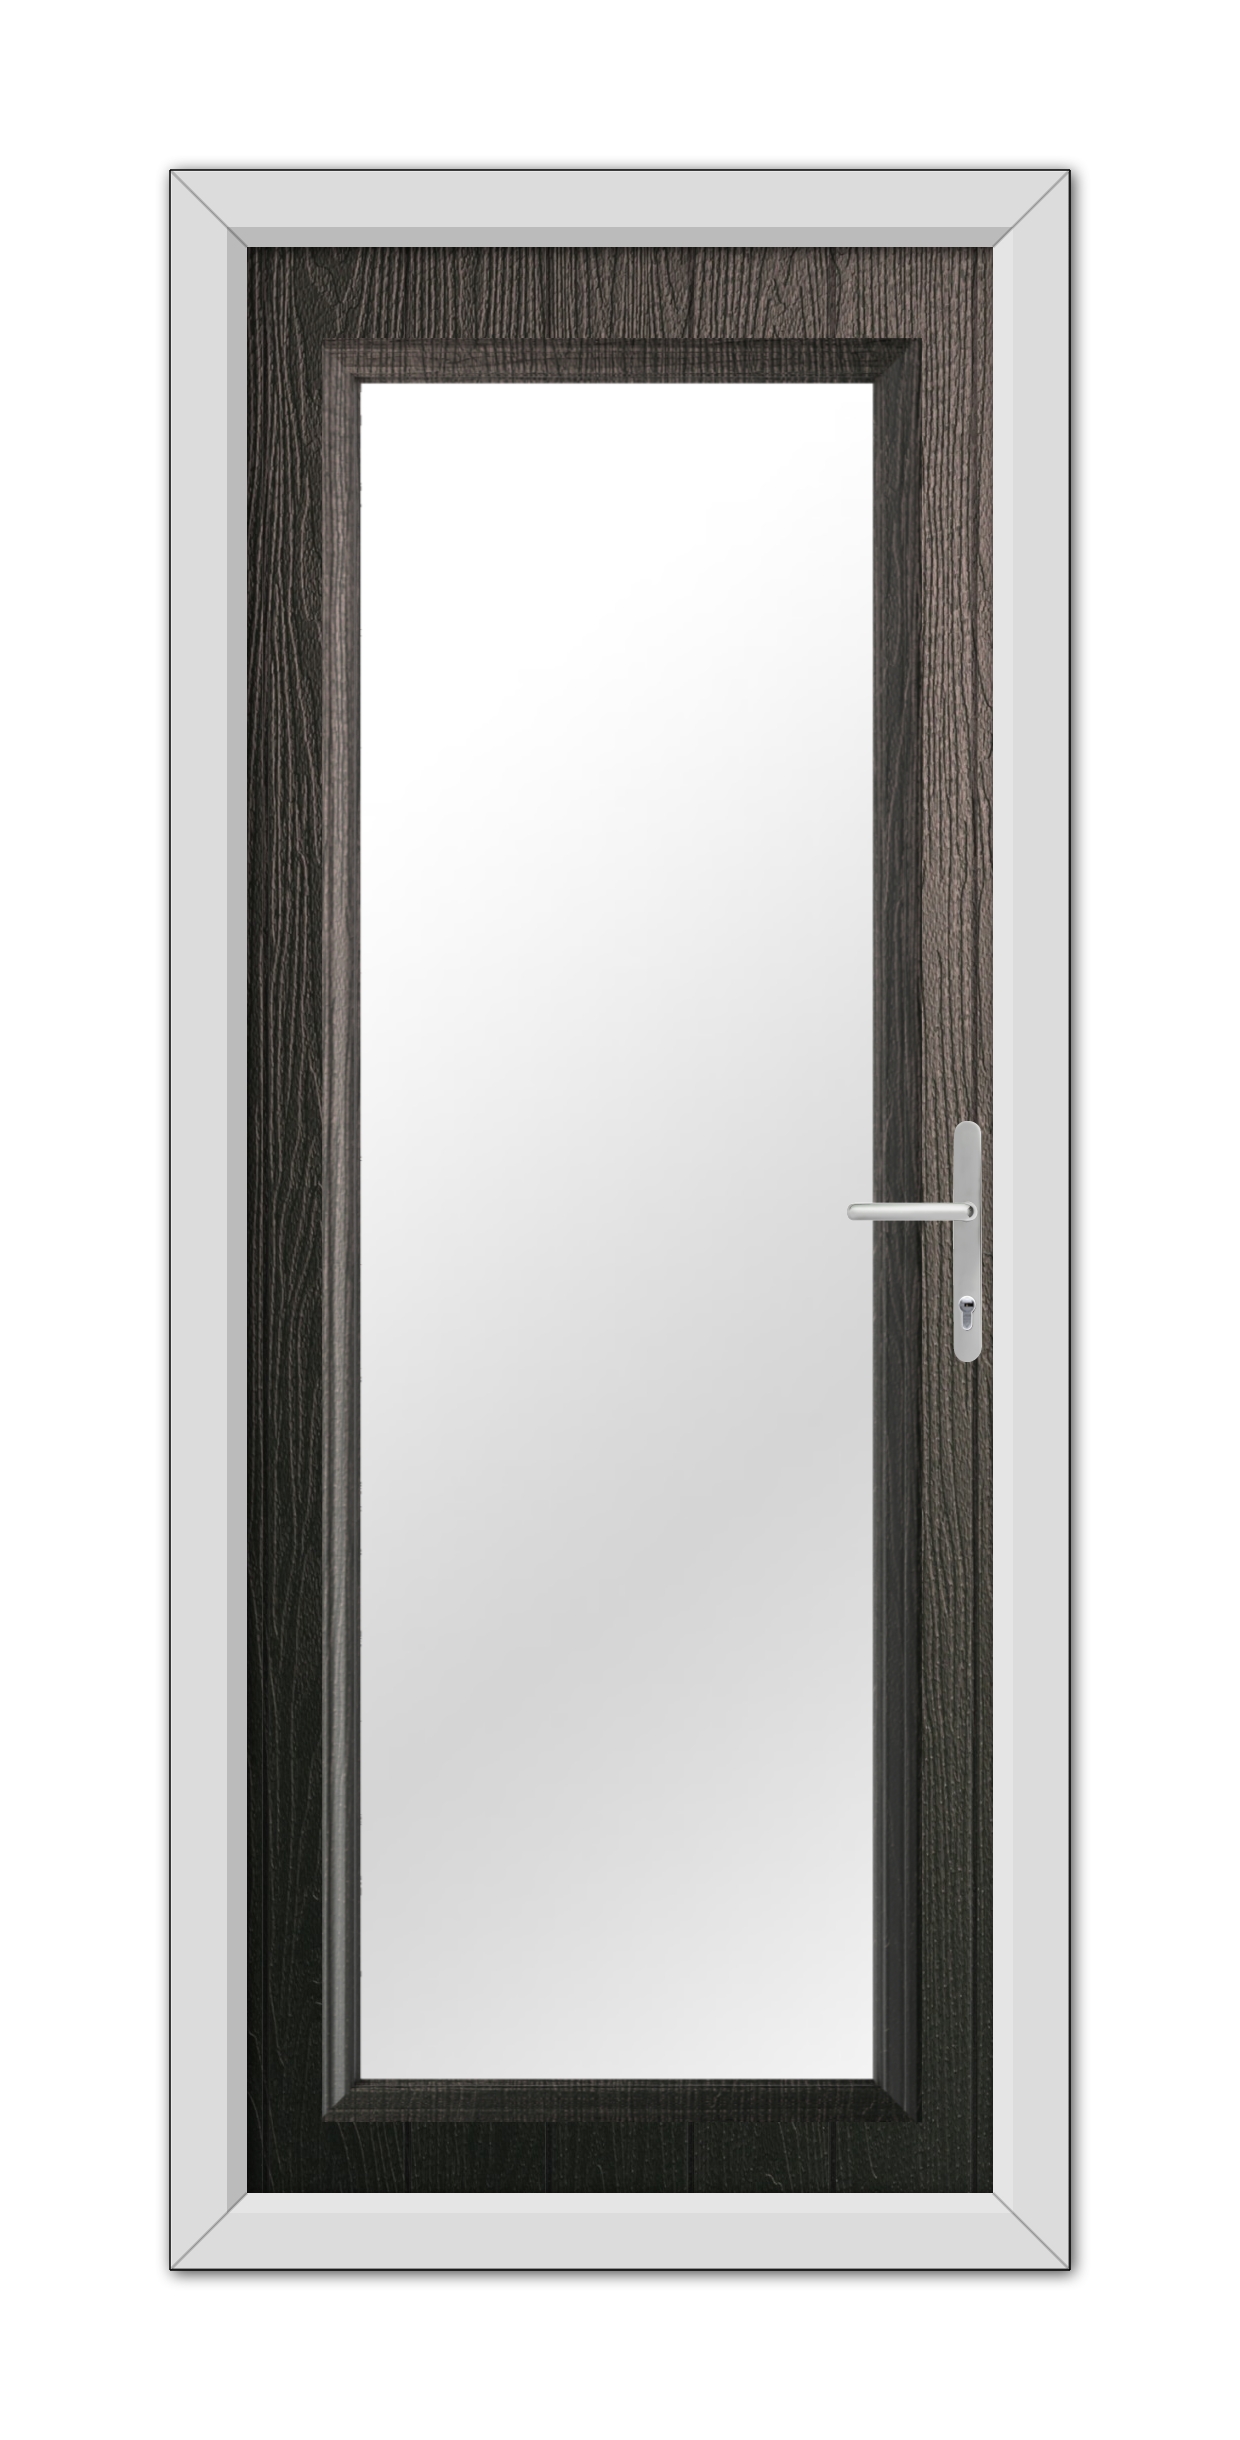 A Schwarzbraun Hatton Composite Door 48mm Timber Core with a vertical glass panel, framed in white, featuring a contemporary steel handle on the right.